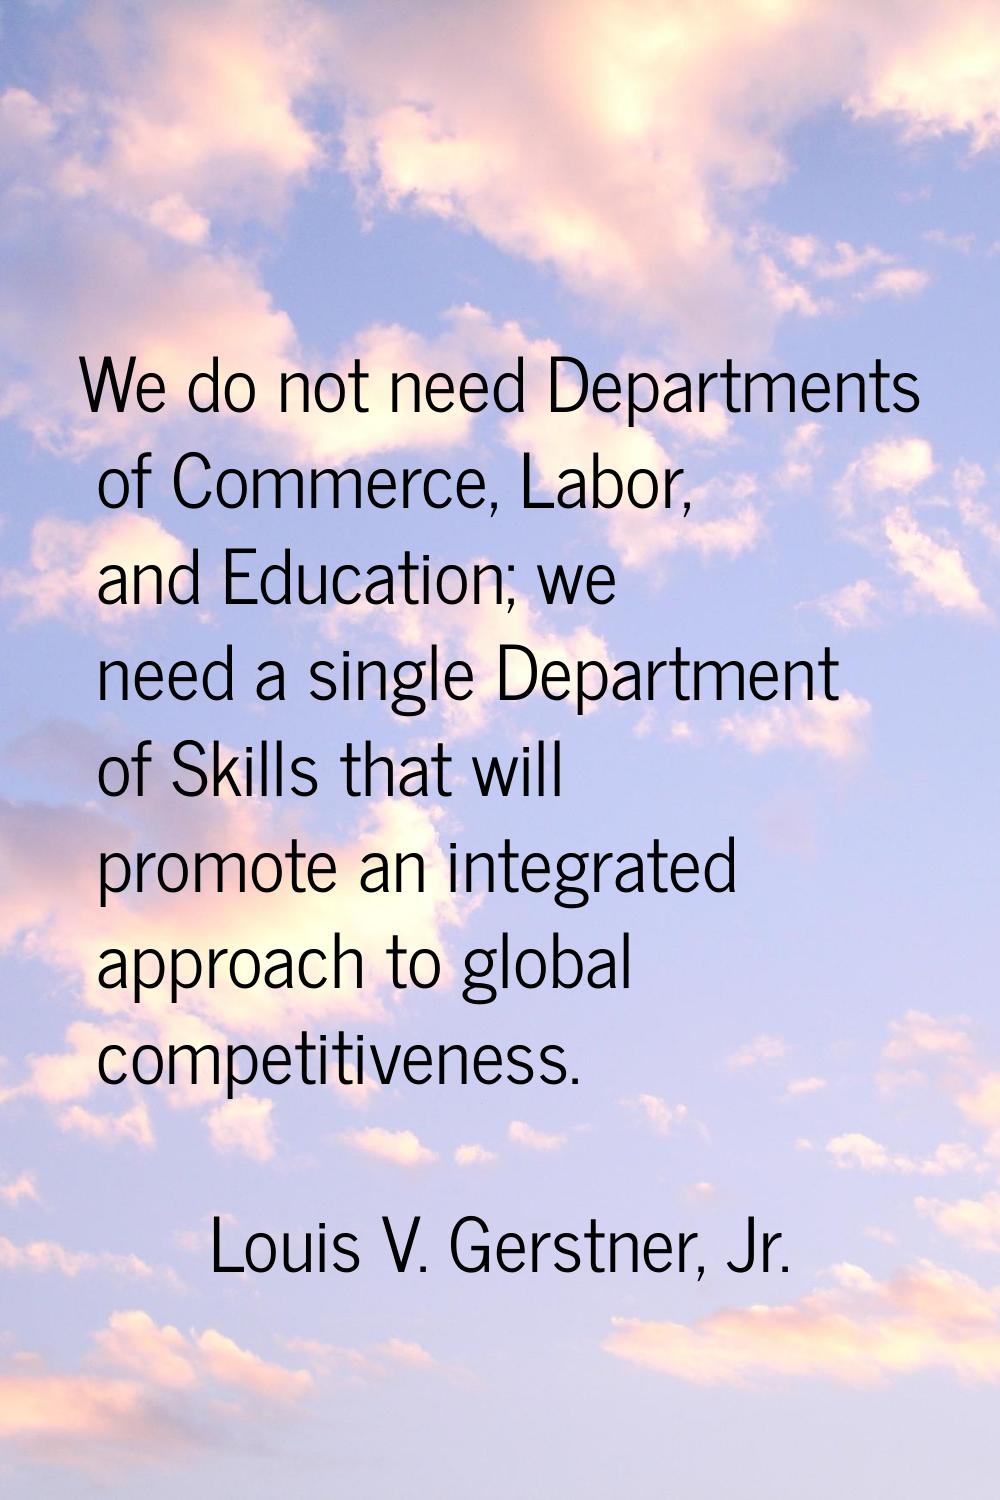 We do not need Departments of Commerce, Labor, and Education; we need a single Department of Skills